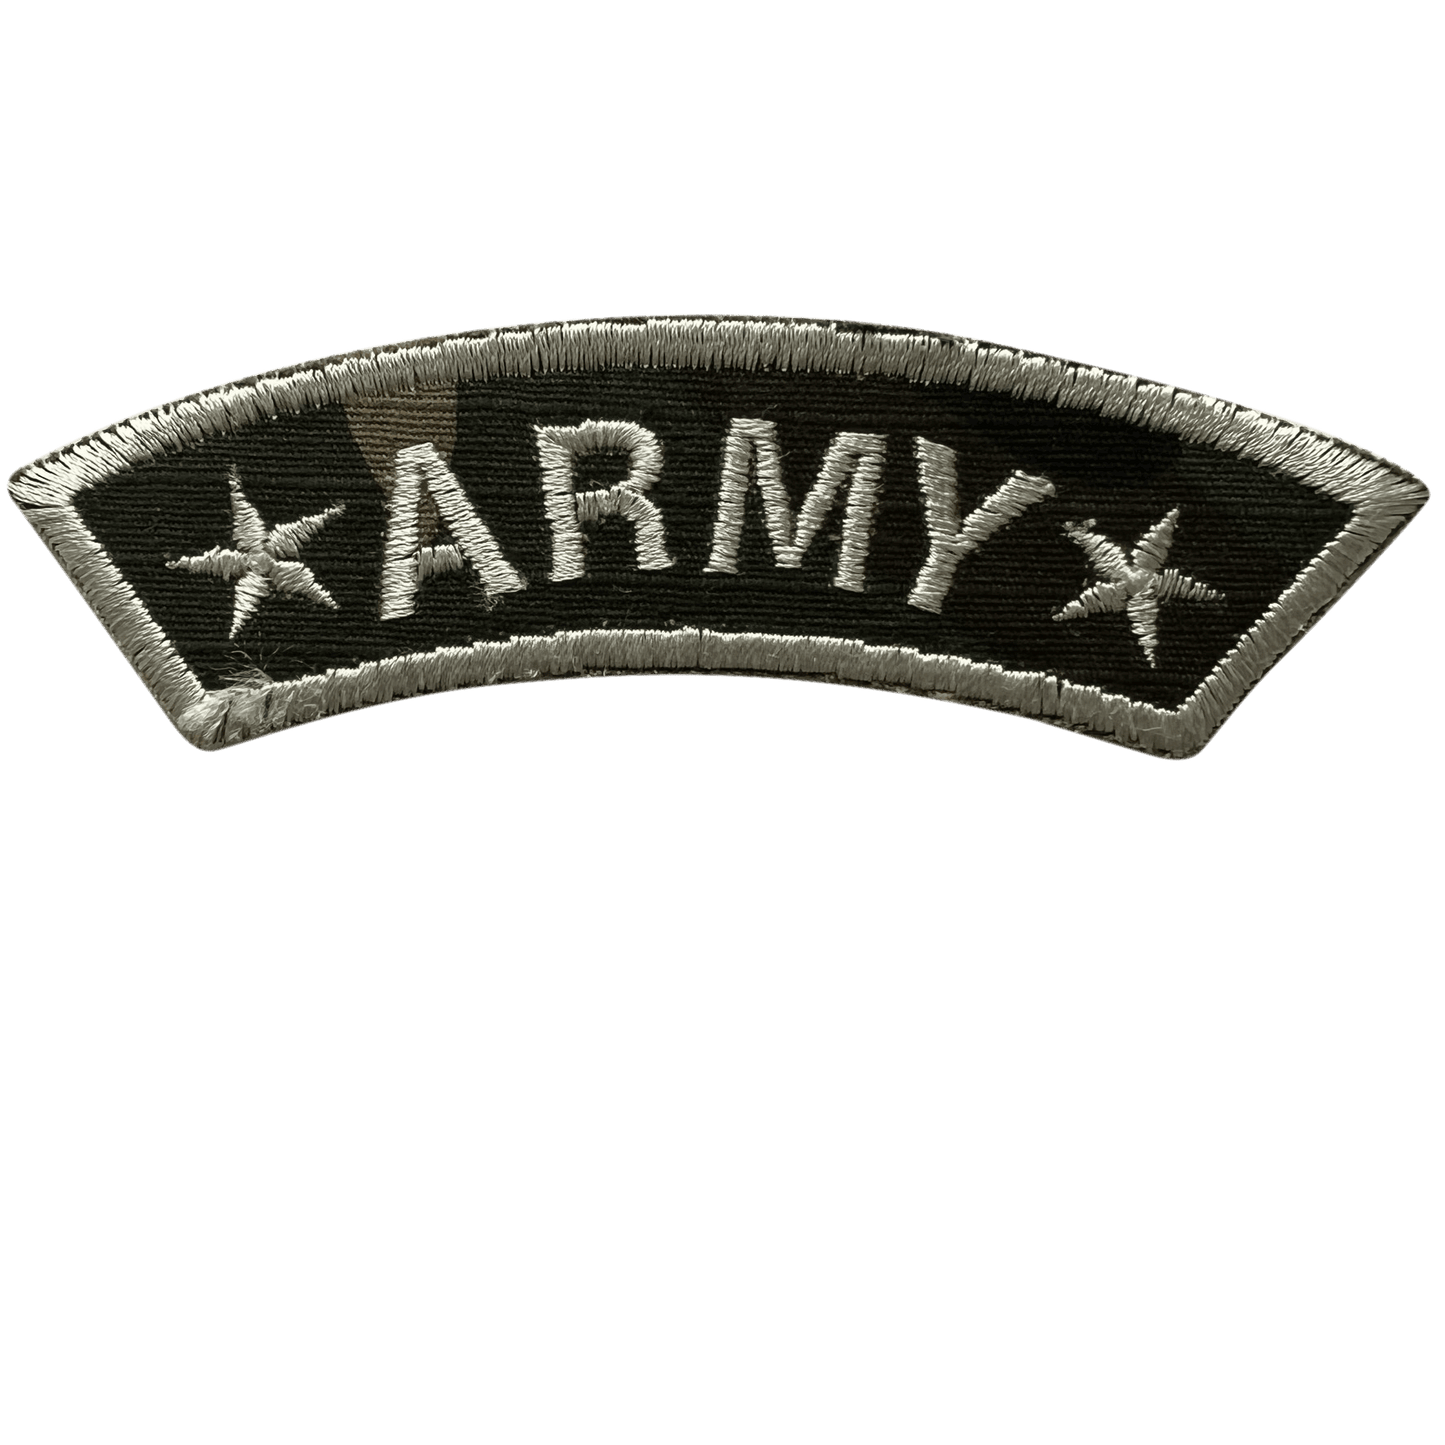 ARMY Patch Iron Sew On Stars Camo Military Uniform Fancy Dress Embroidered Badge